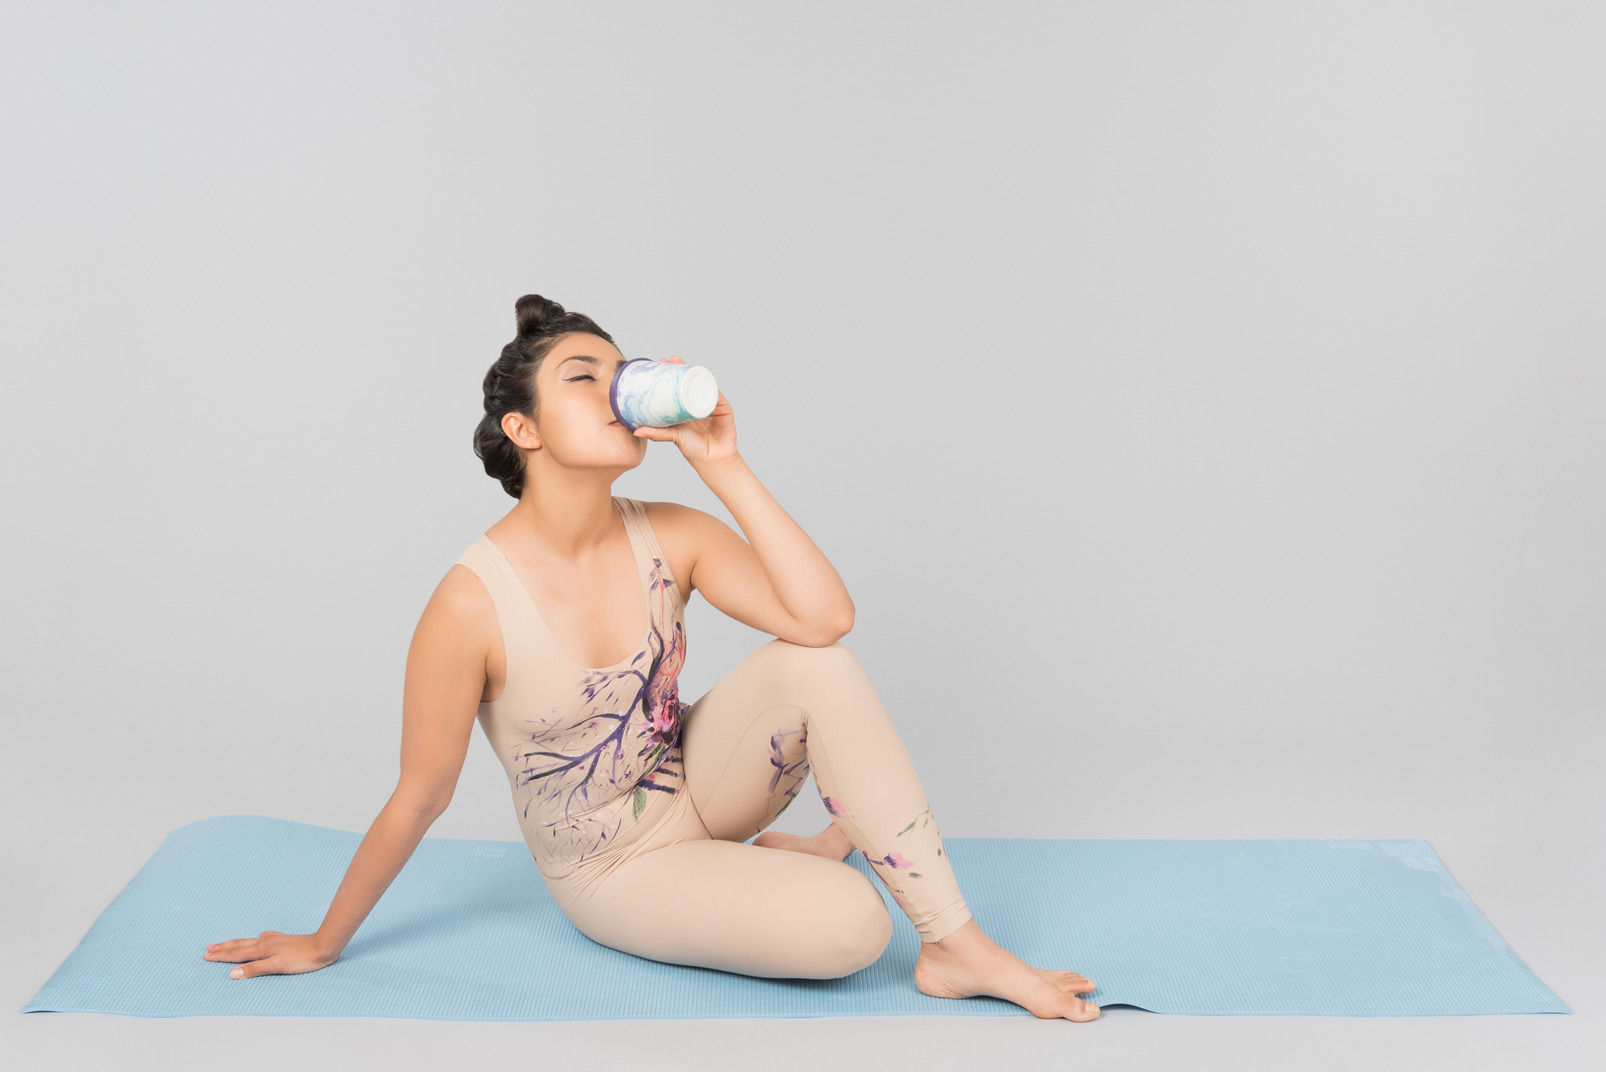 Young indian gymnast sitting on yoga mat and drinking coffee